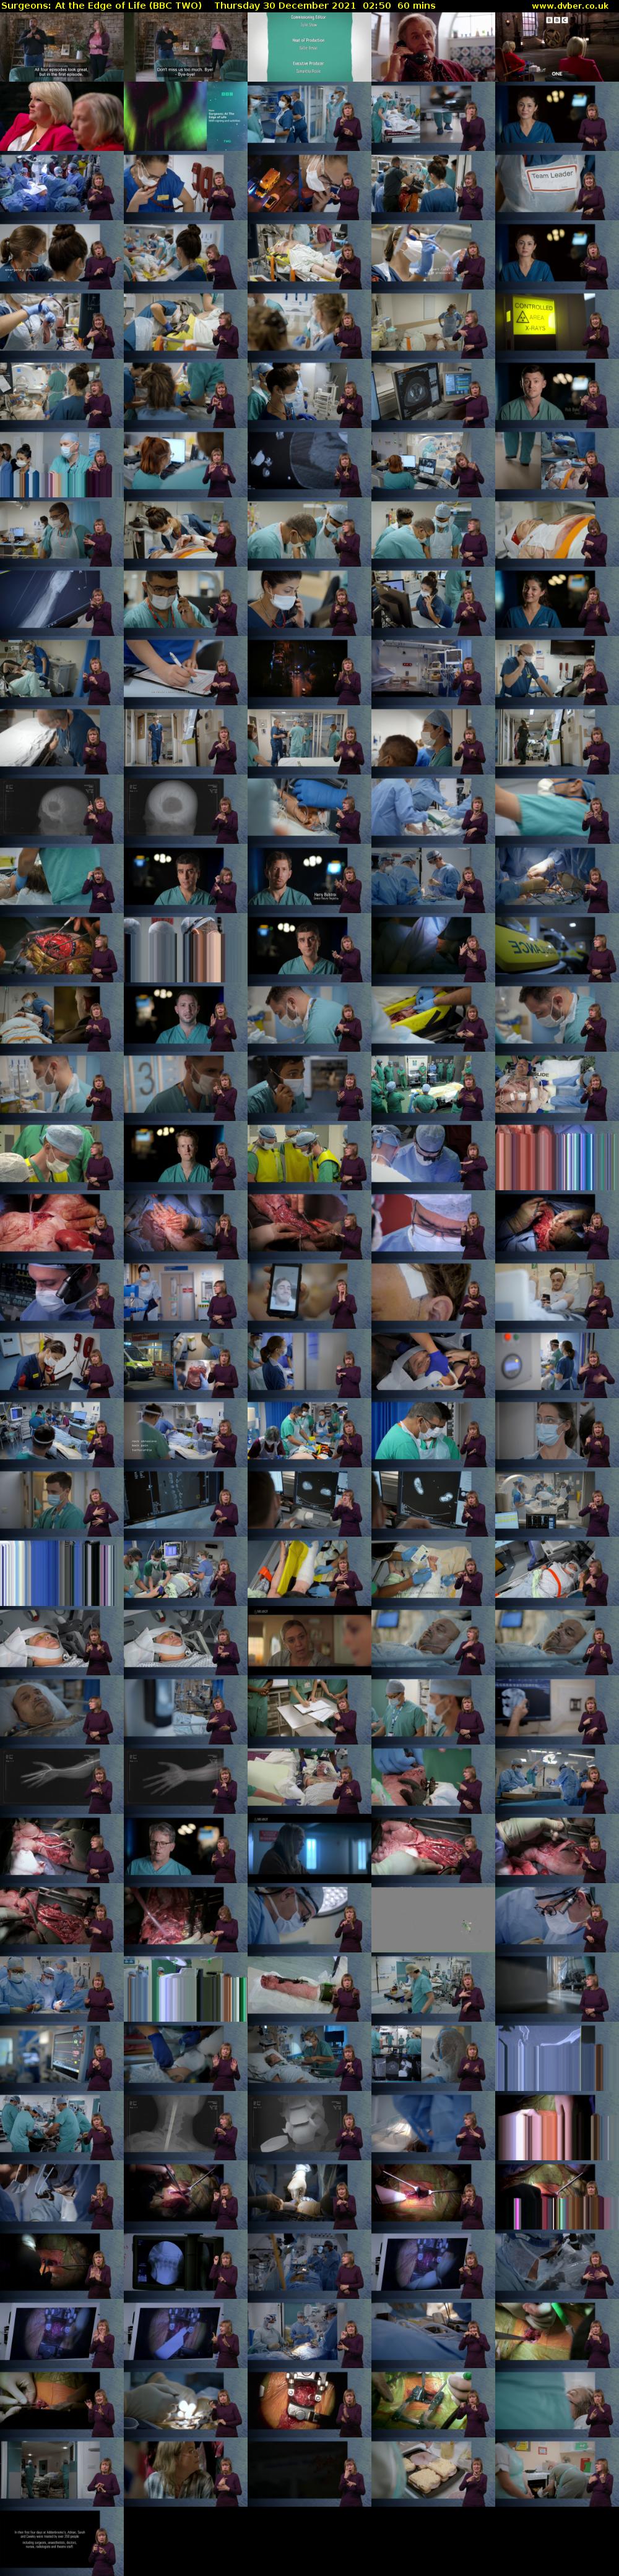 Surgeons: At the Edge of Life (BBC TWO) Thursday 30 December 2021 02:50 - 03:50